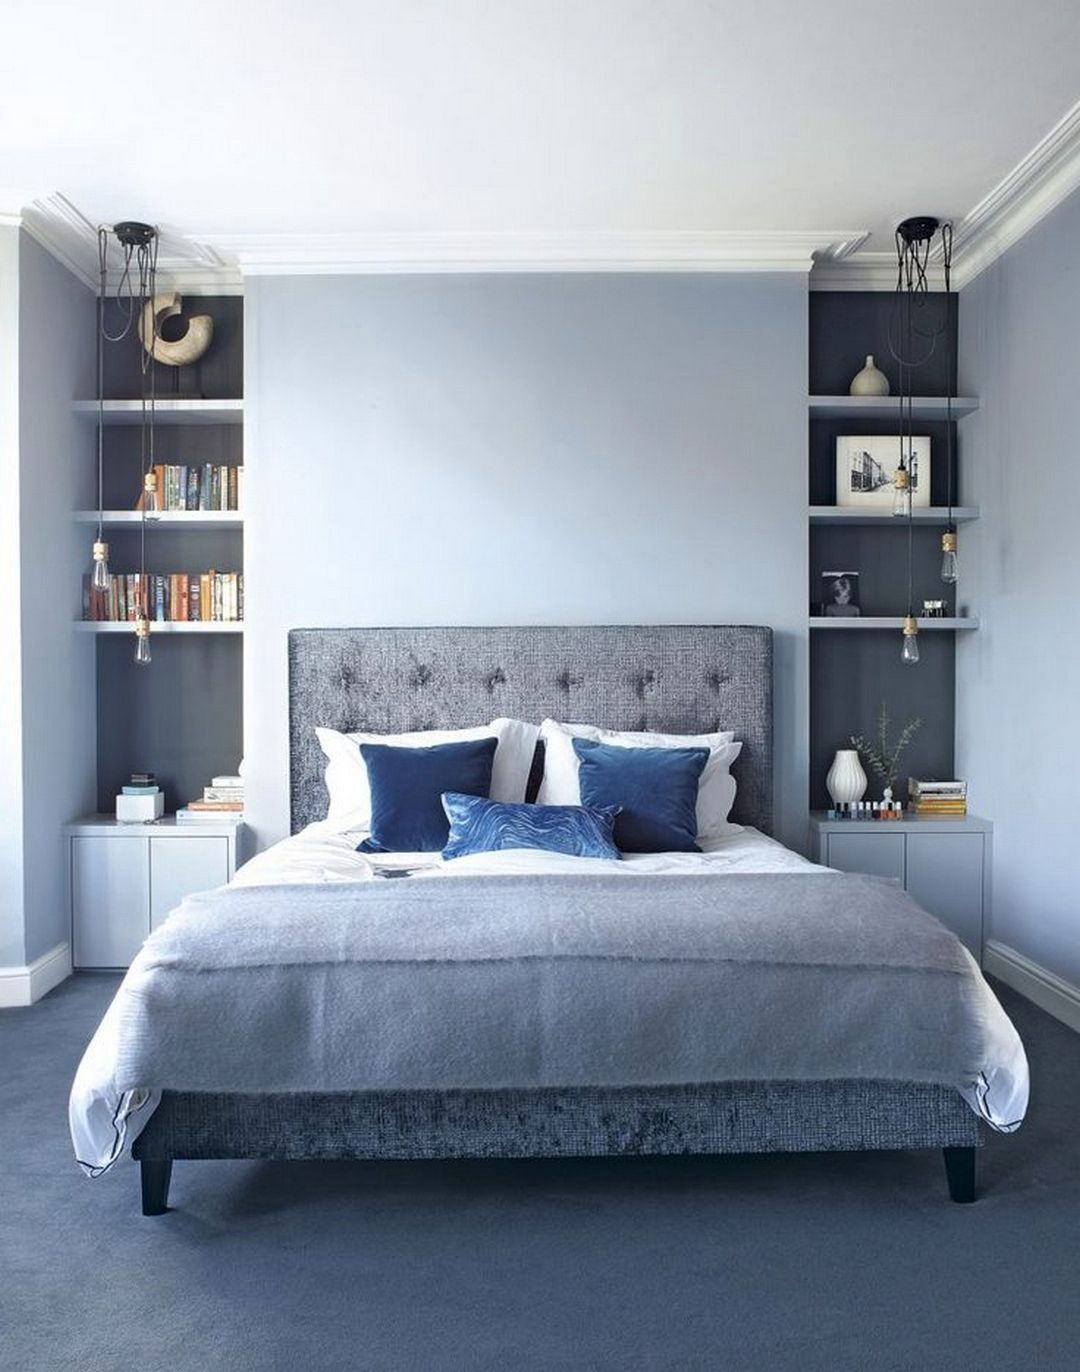 Awesome Bedroom Storage Design Ideas